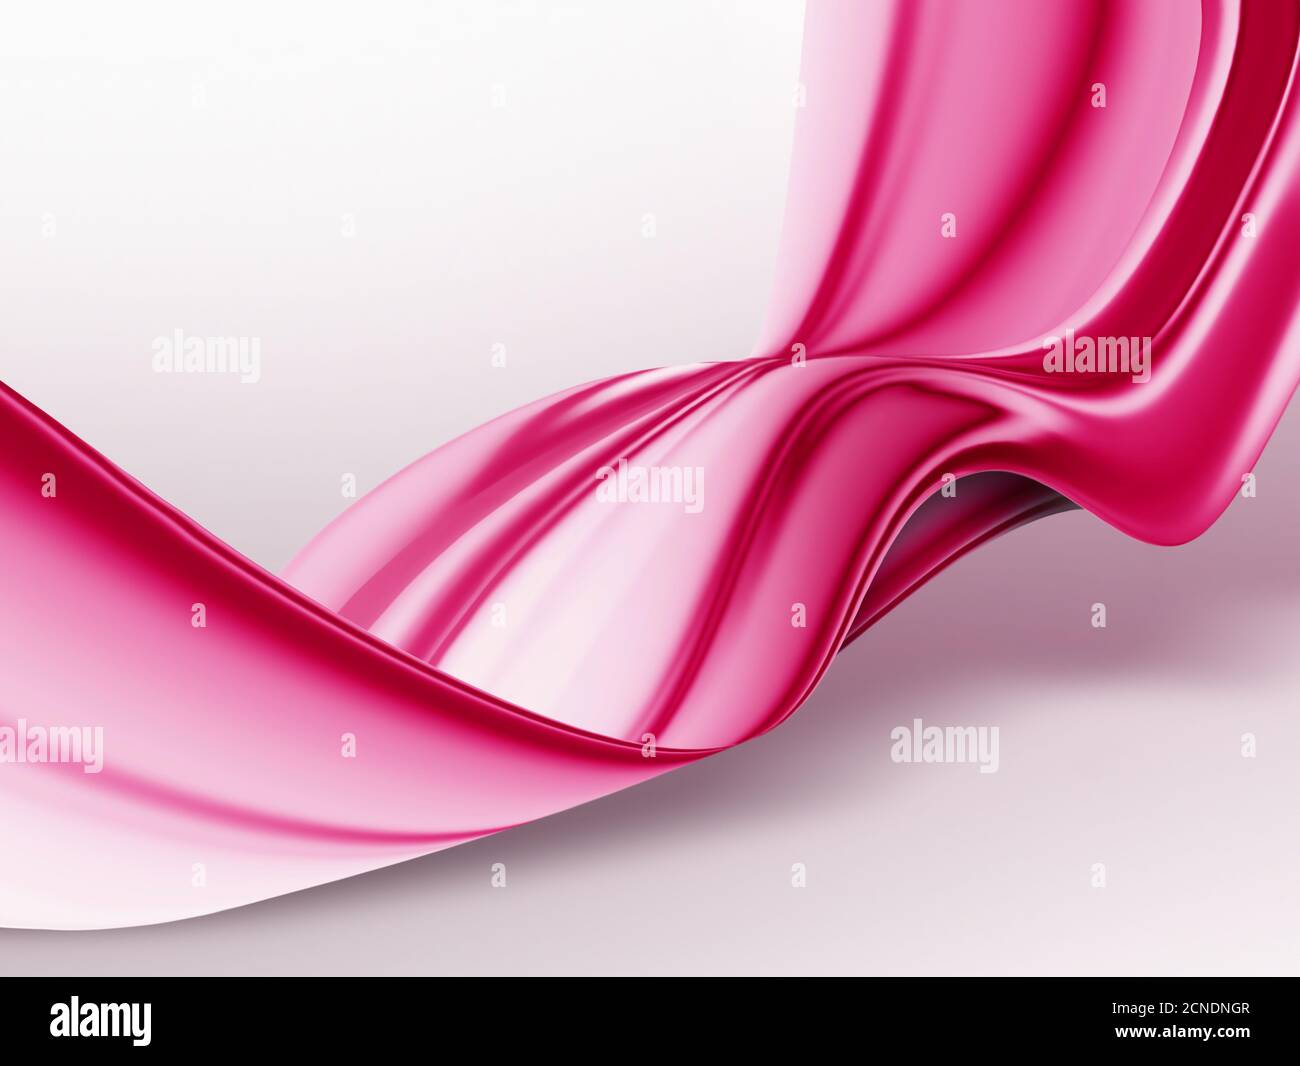 candy wave Stock Photo